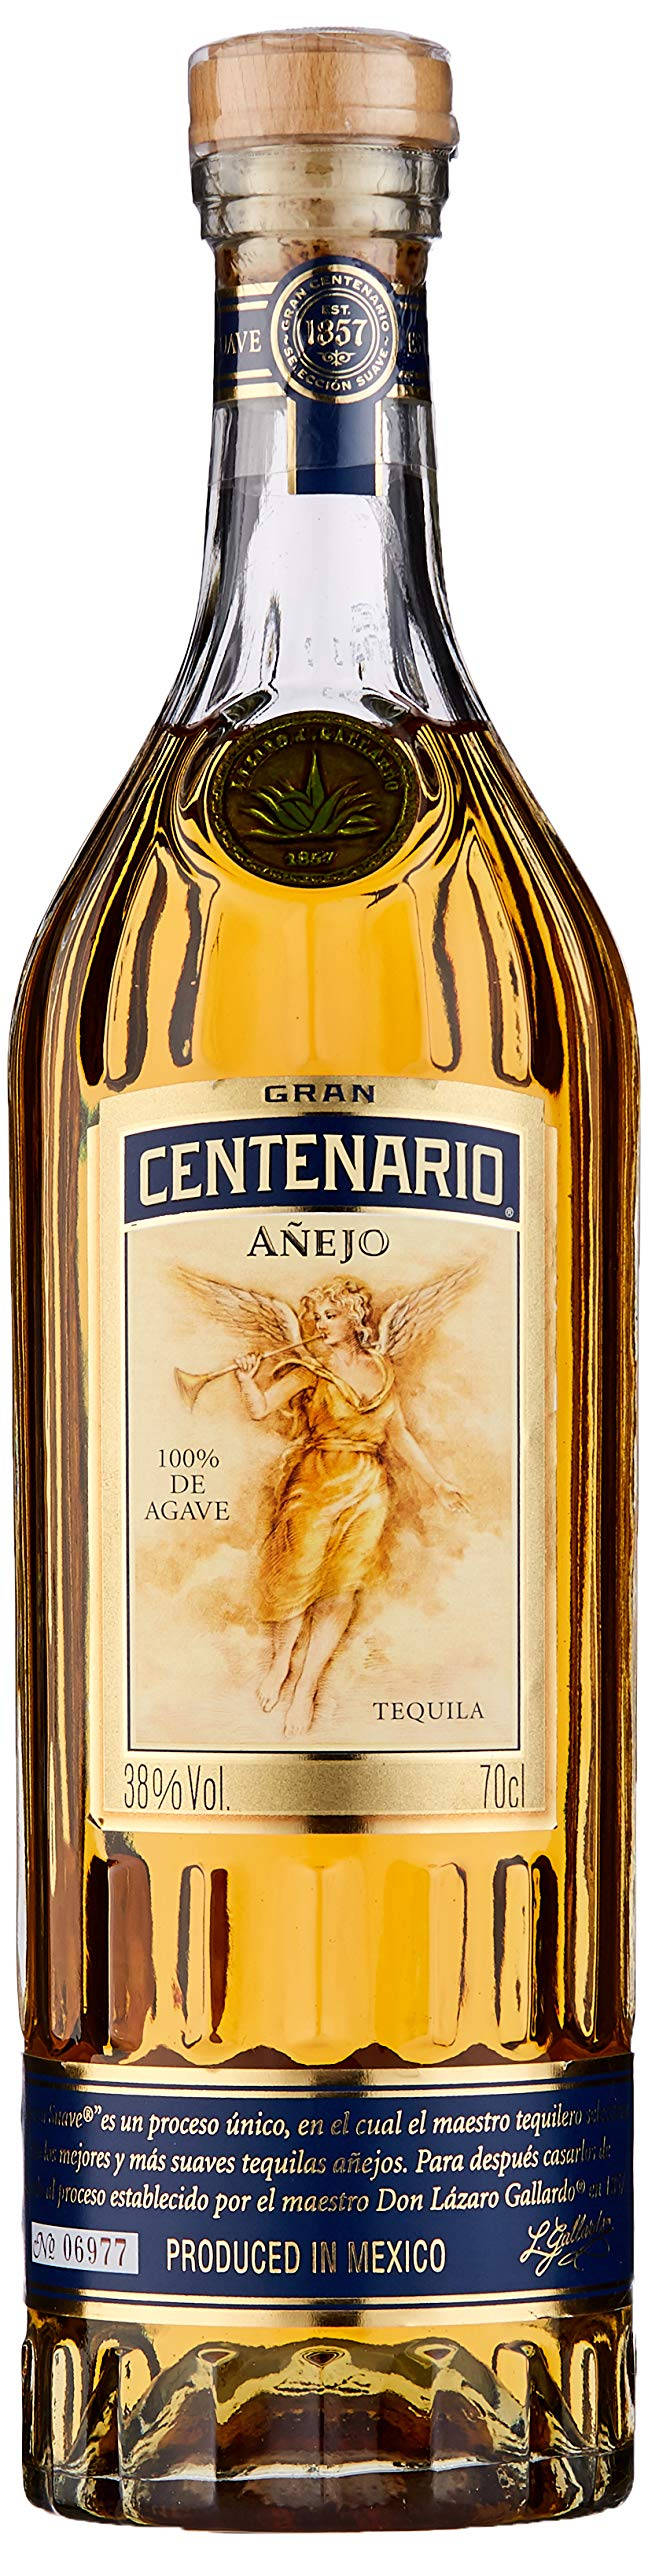 Enjoy the Rich, Full Bodied Experience of Gran Centenario Anejo Tequila Wallpaper